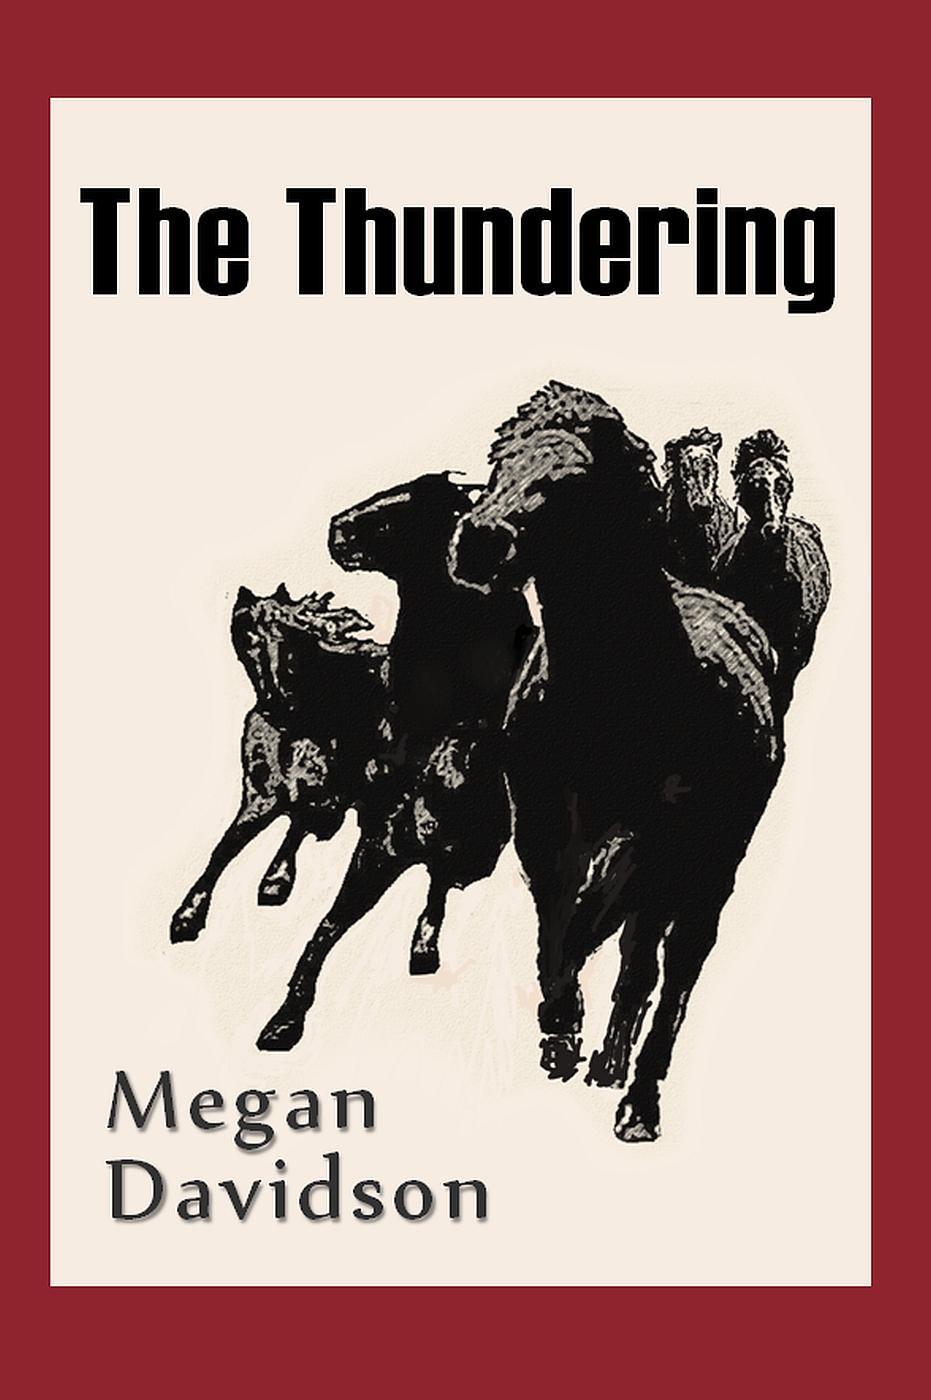 The Thundering